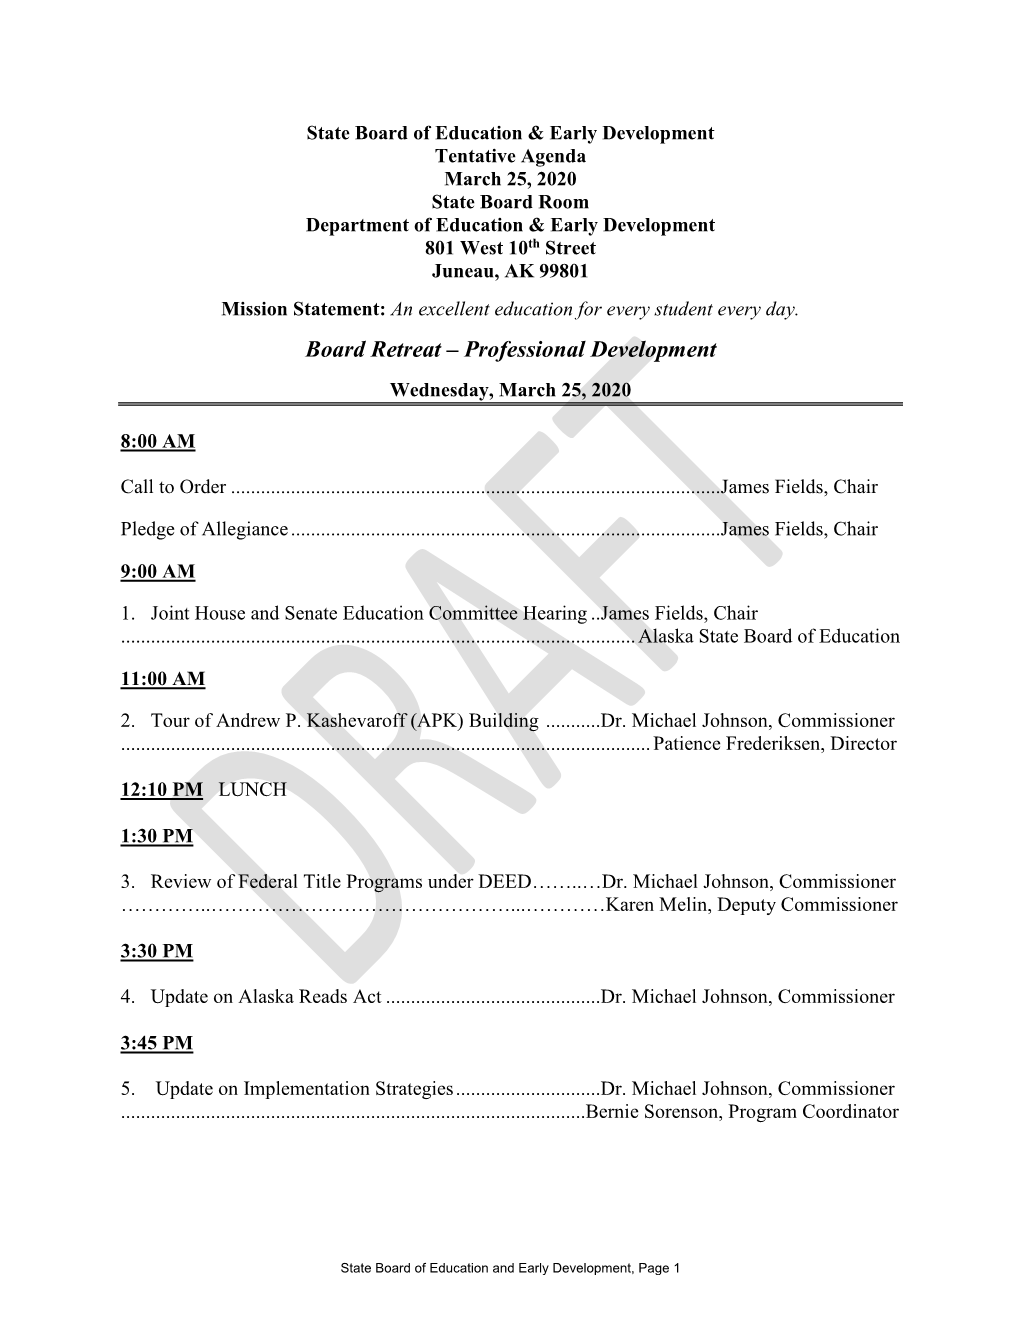 State Board of Education and Early Development March Packet